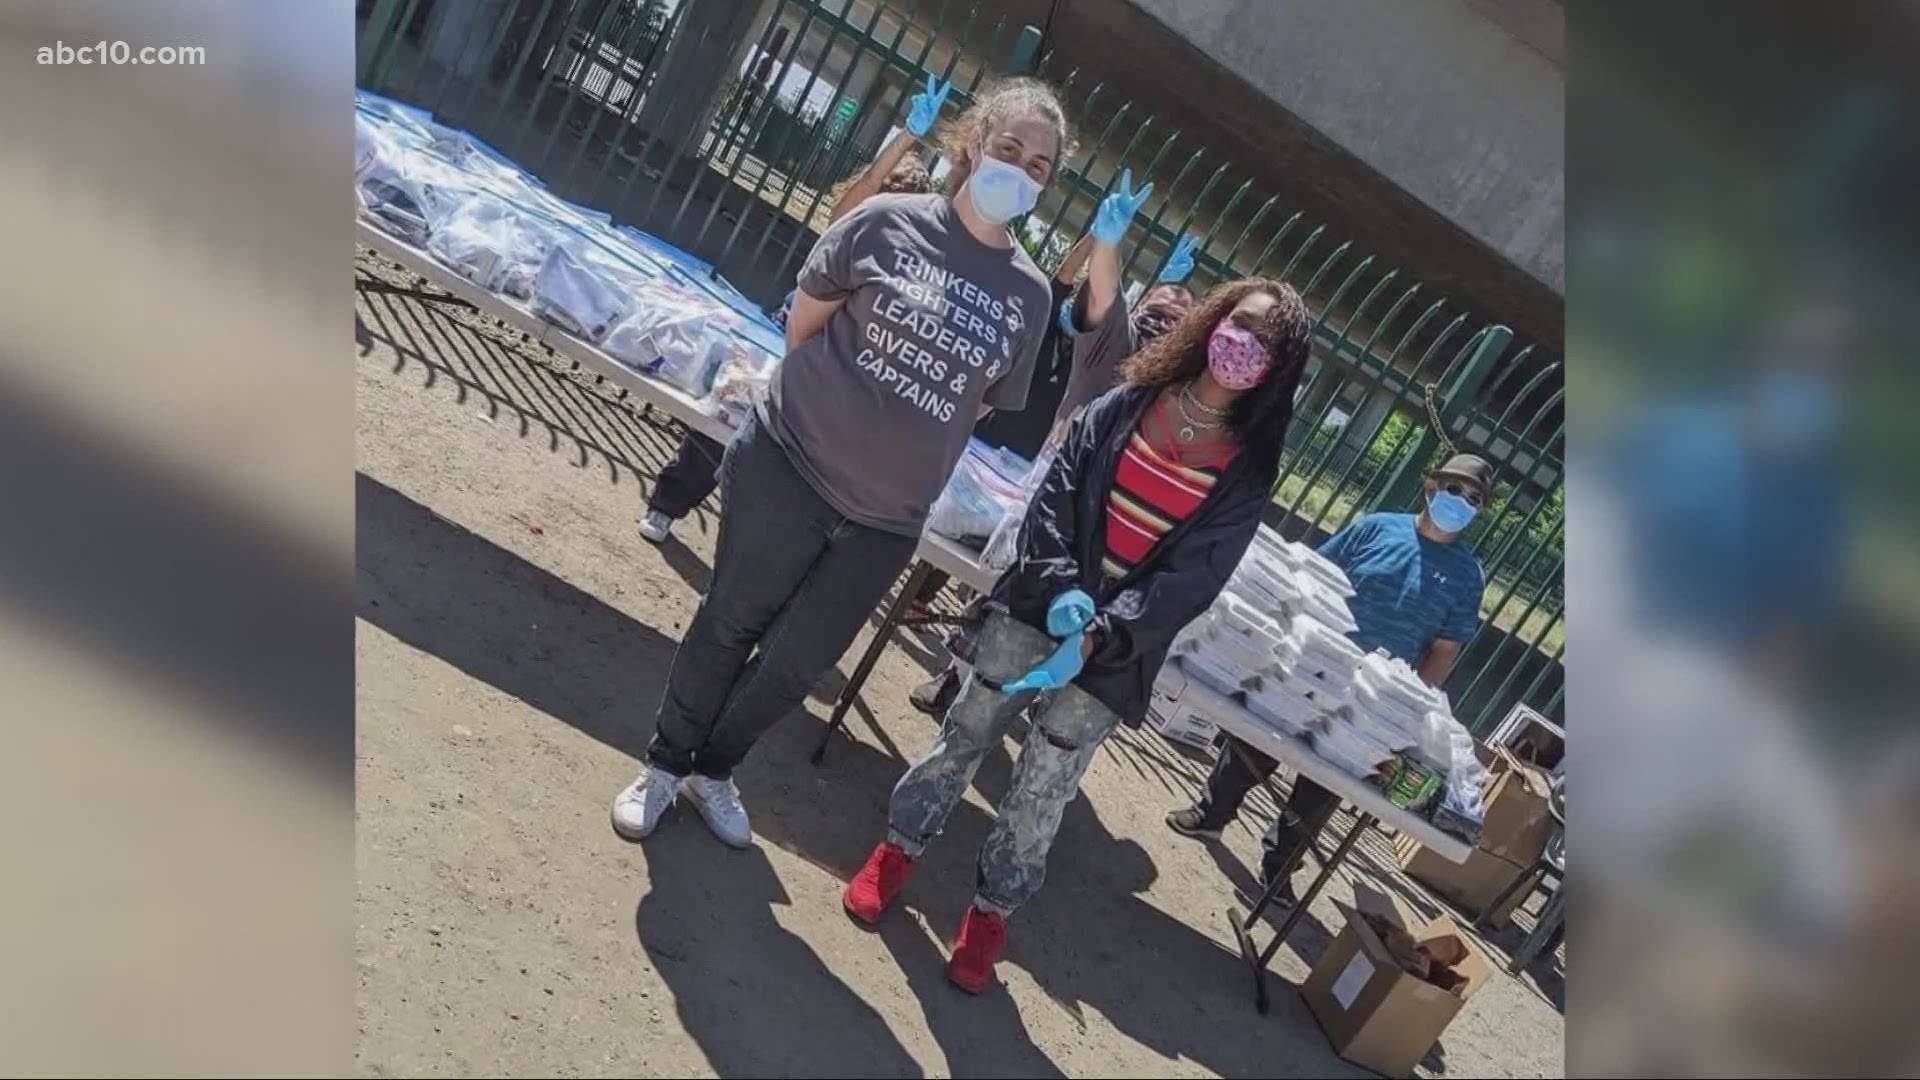 There are nearly 2,000 homeless students in the Stockton Unified School District. Mariah's Closet is helping the kids by providing hygiene products.